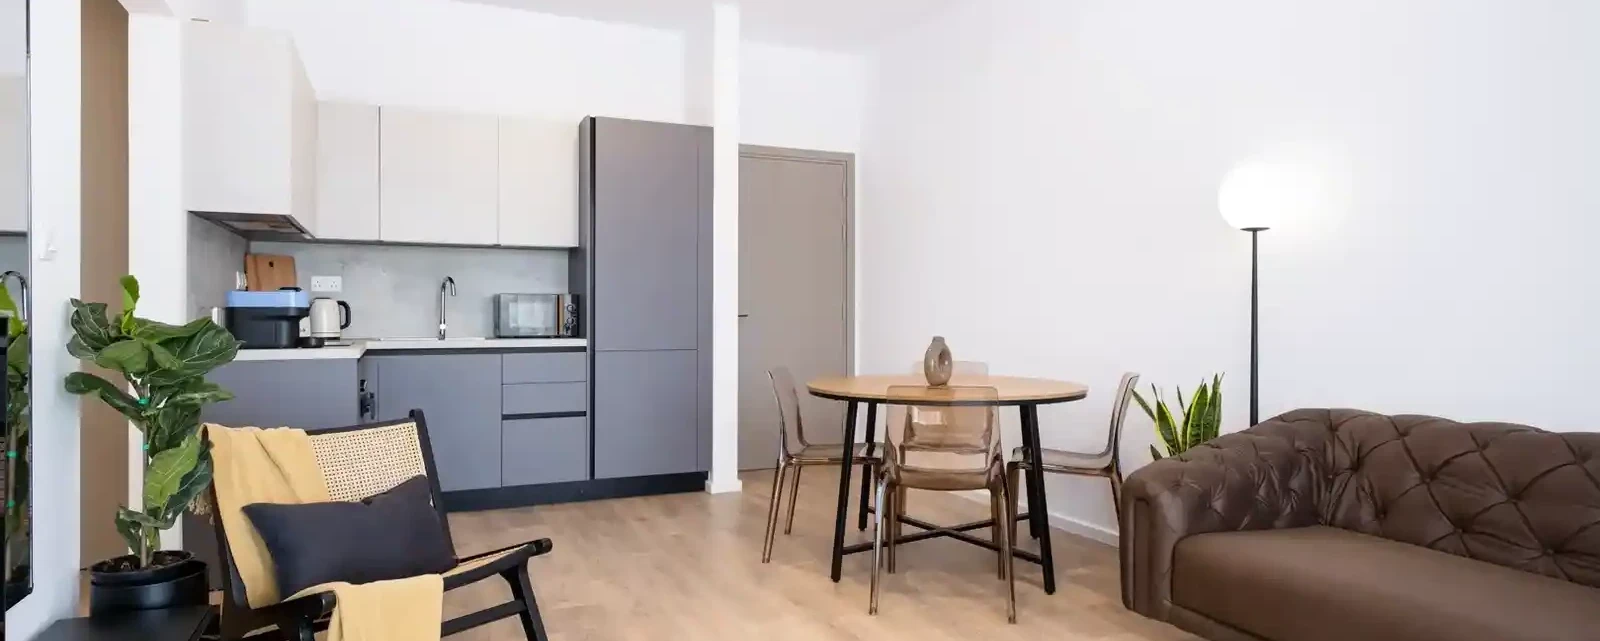 1-bedroom apartment to rent €1.700, image 1